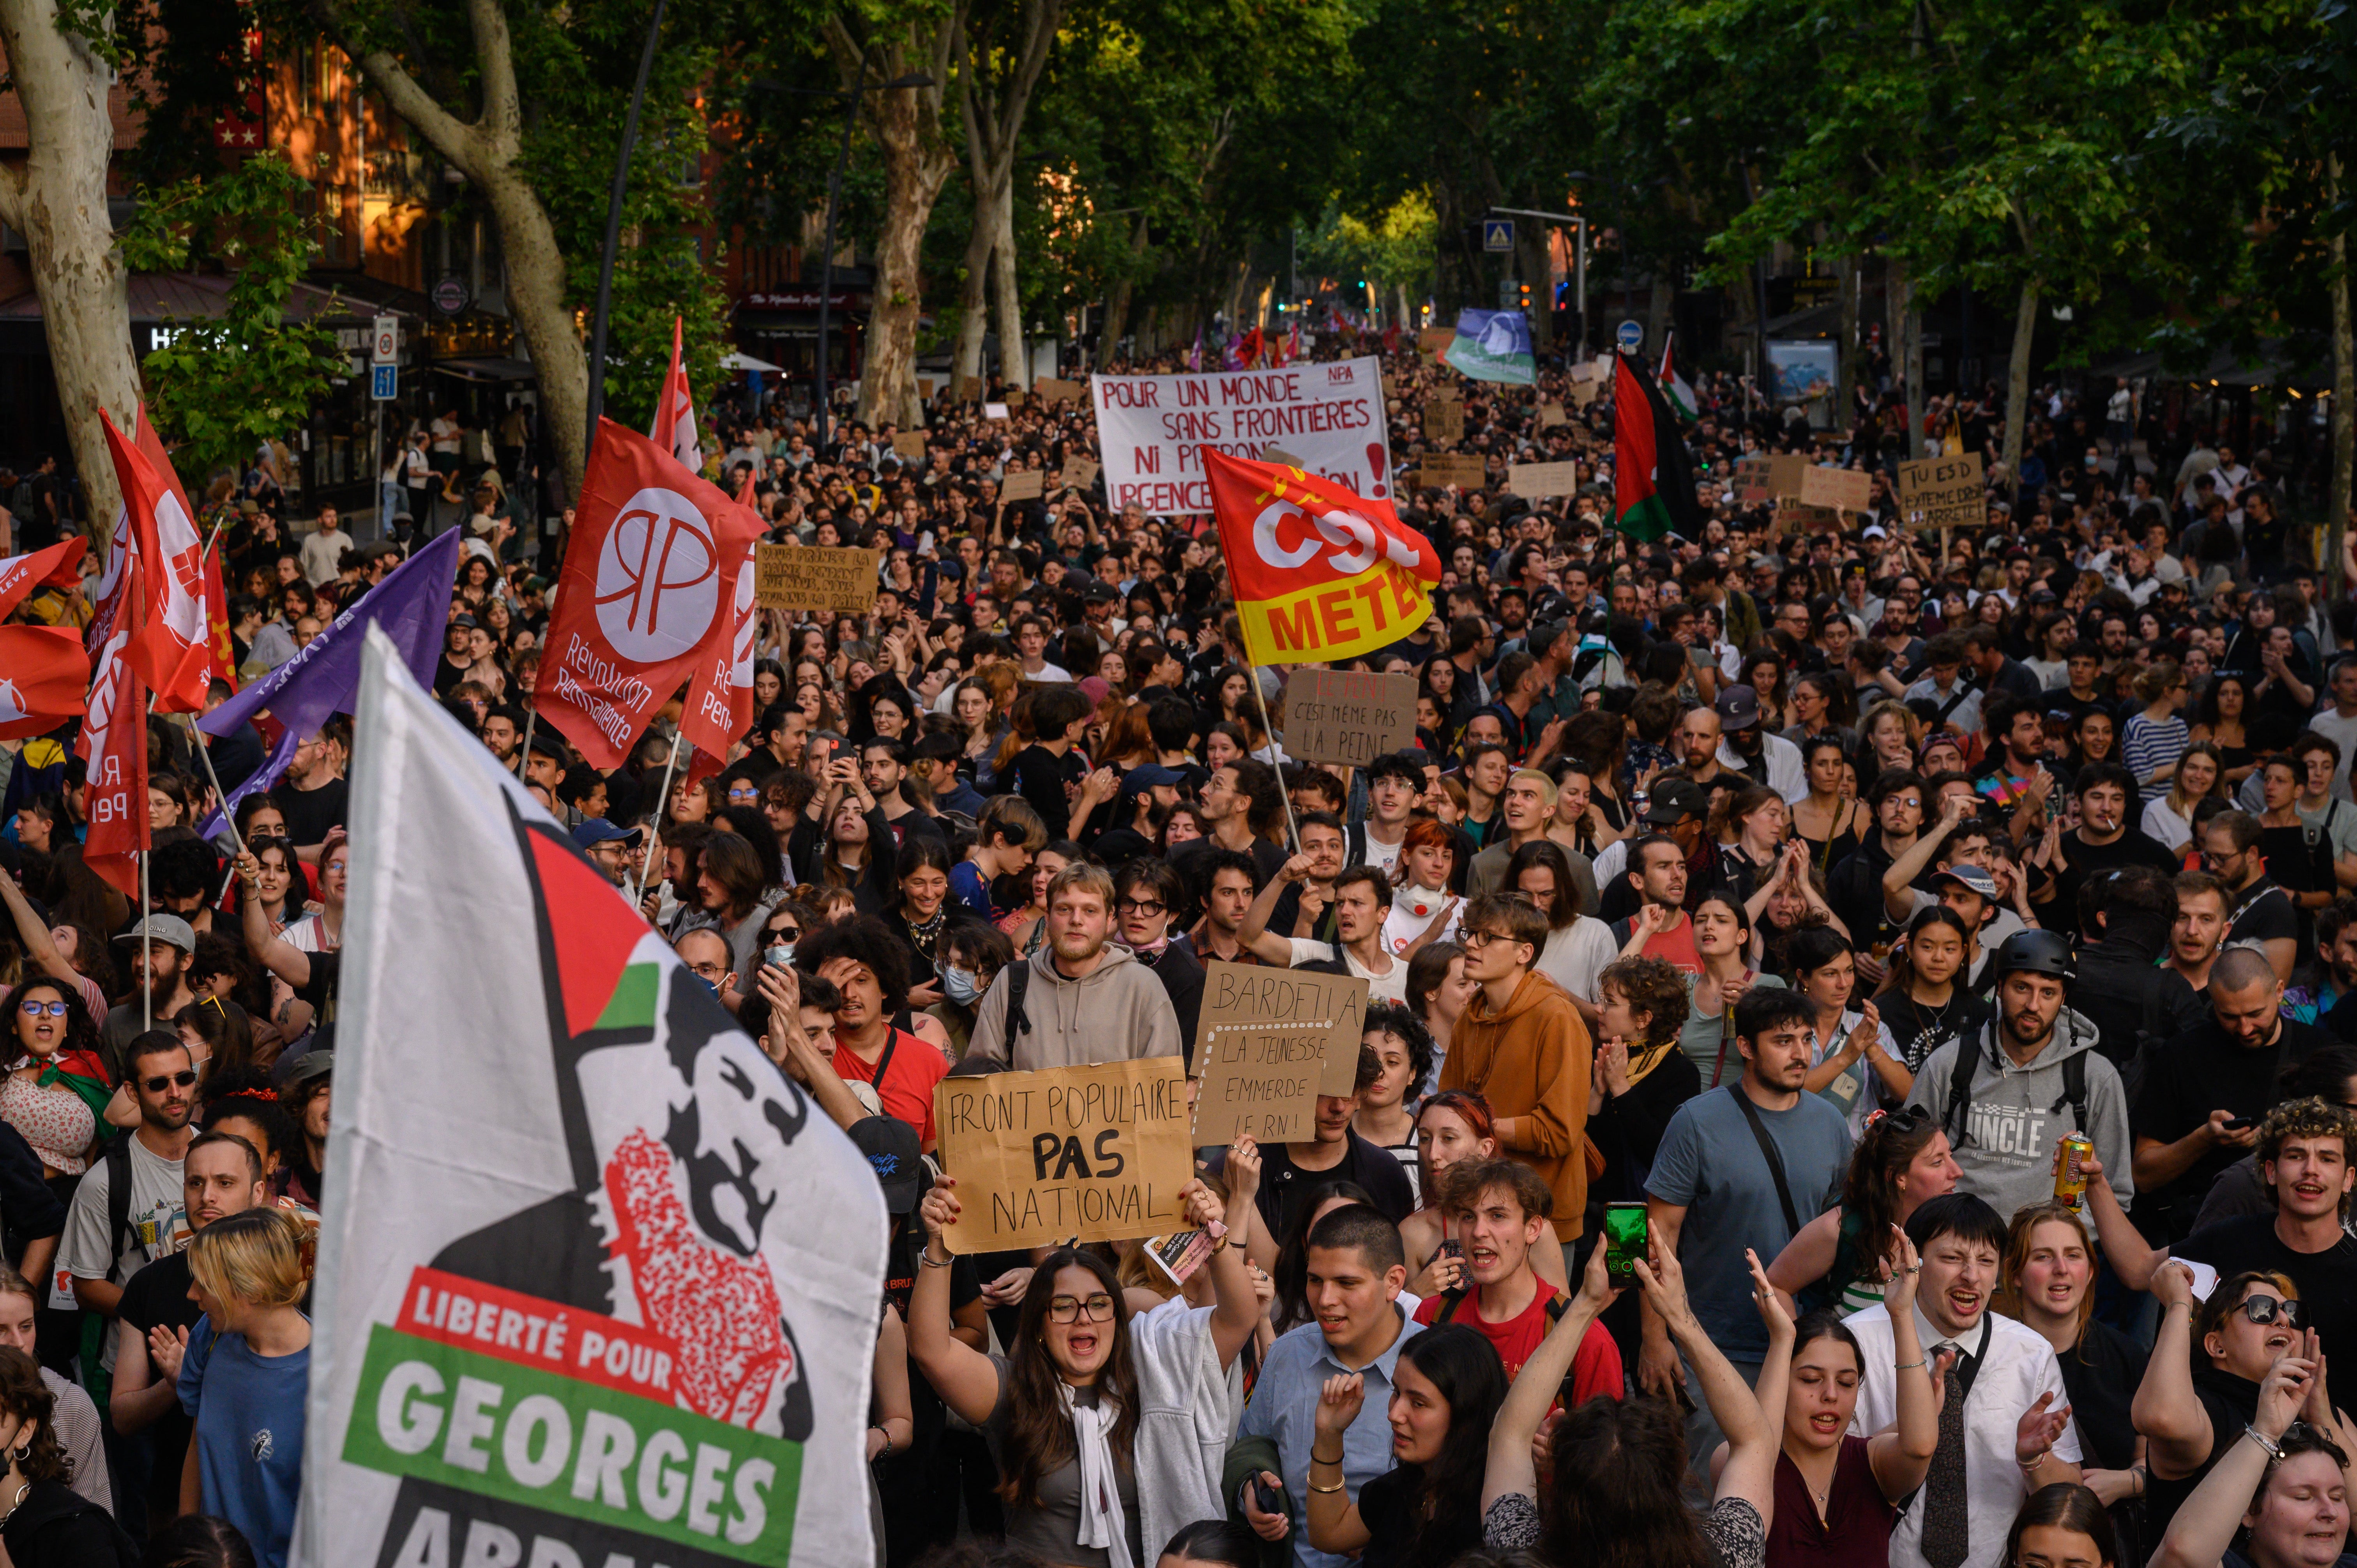 An ‘anti-fascist rally’ in Toulouse on Monday following the European election results